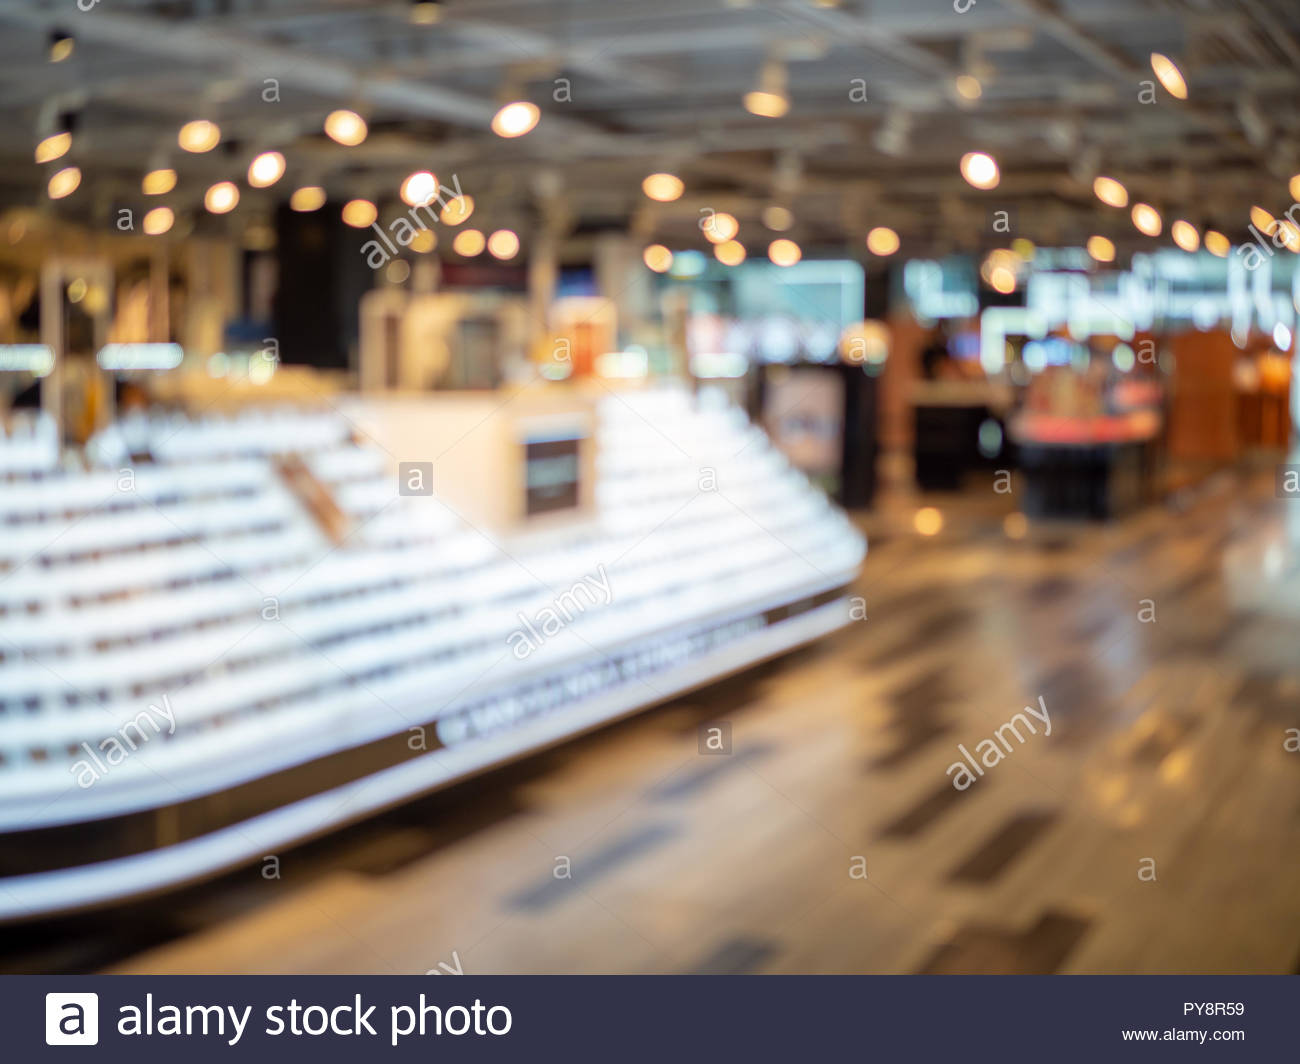 Blurred Shopping Mall Background With Sunglasses On Shelf Display